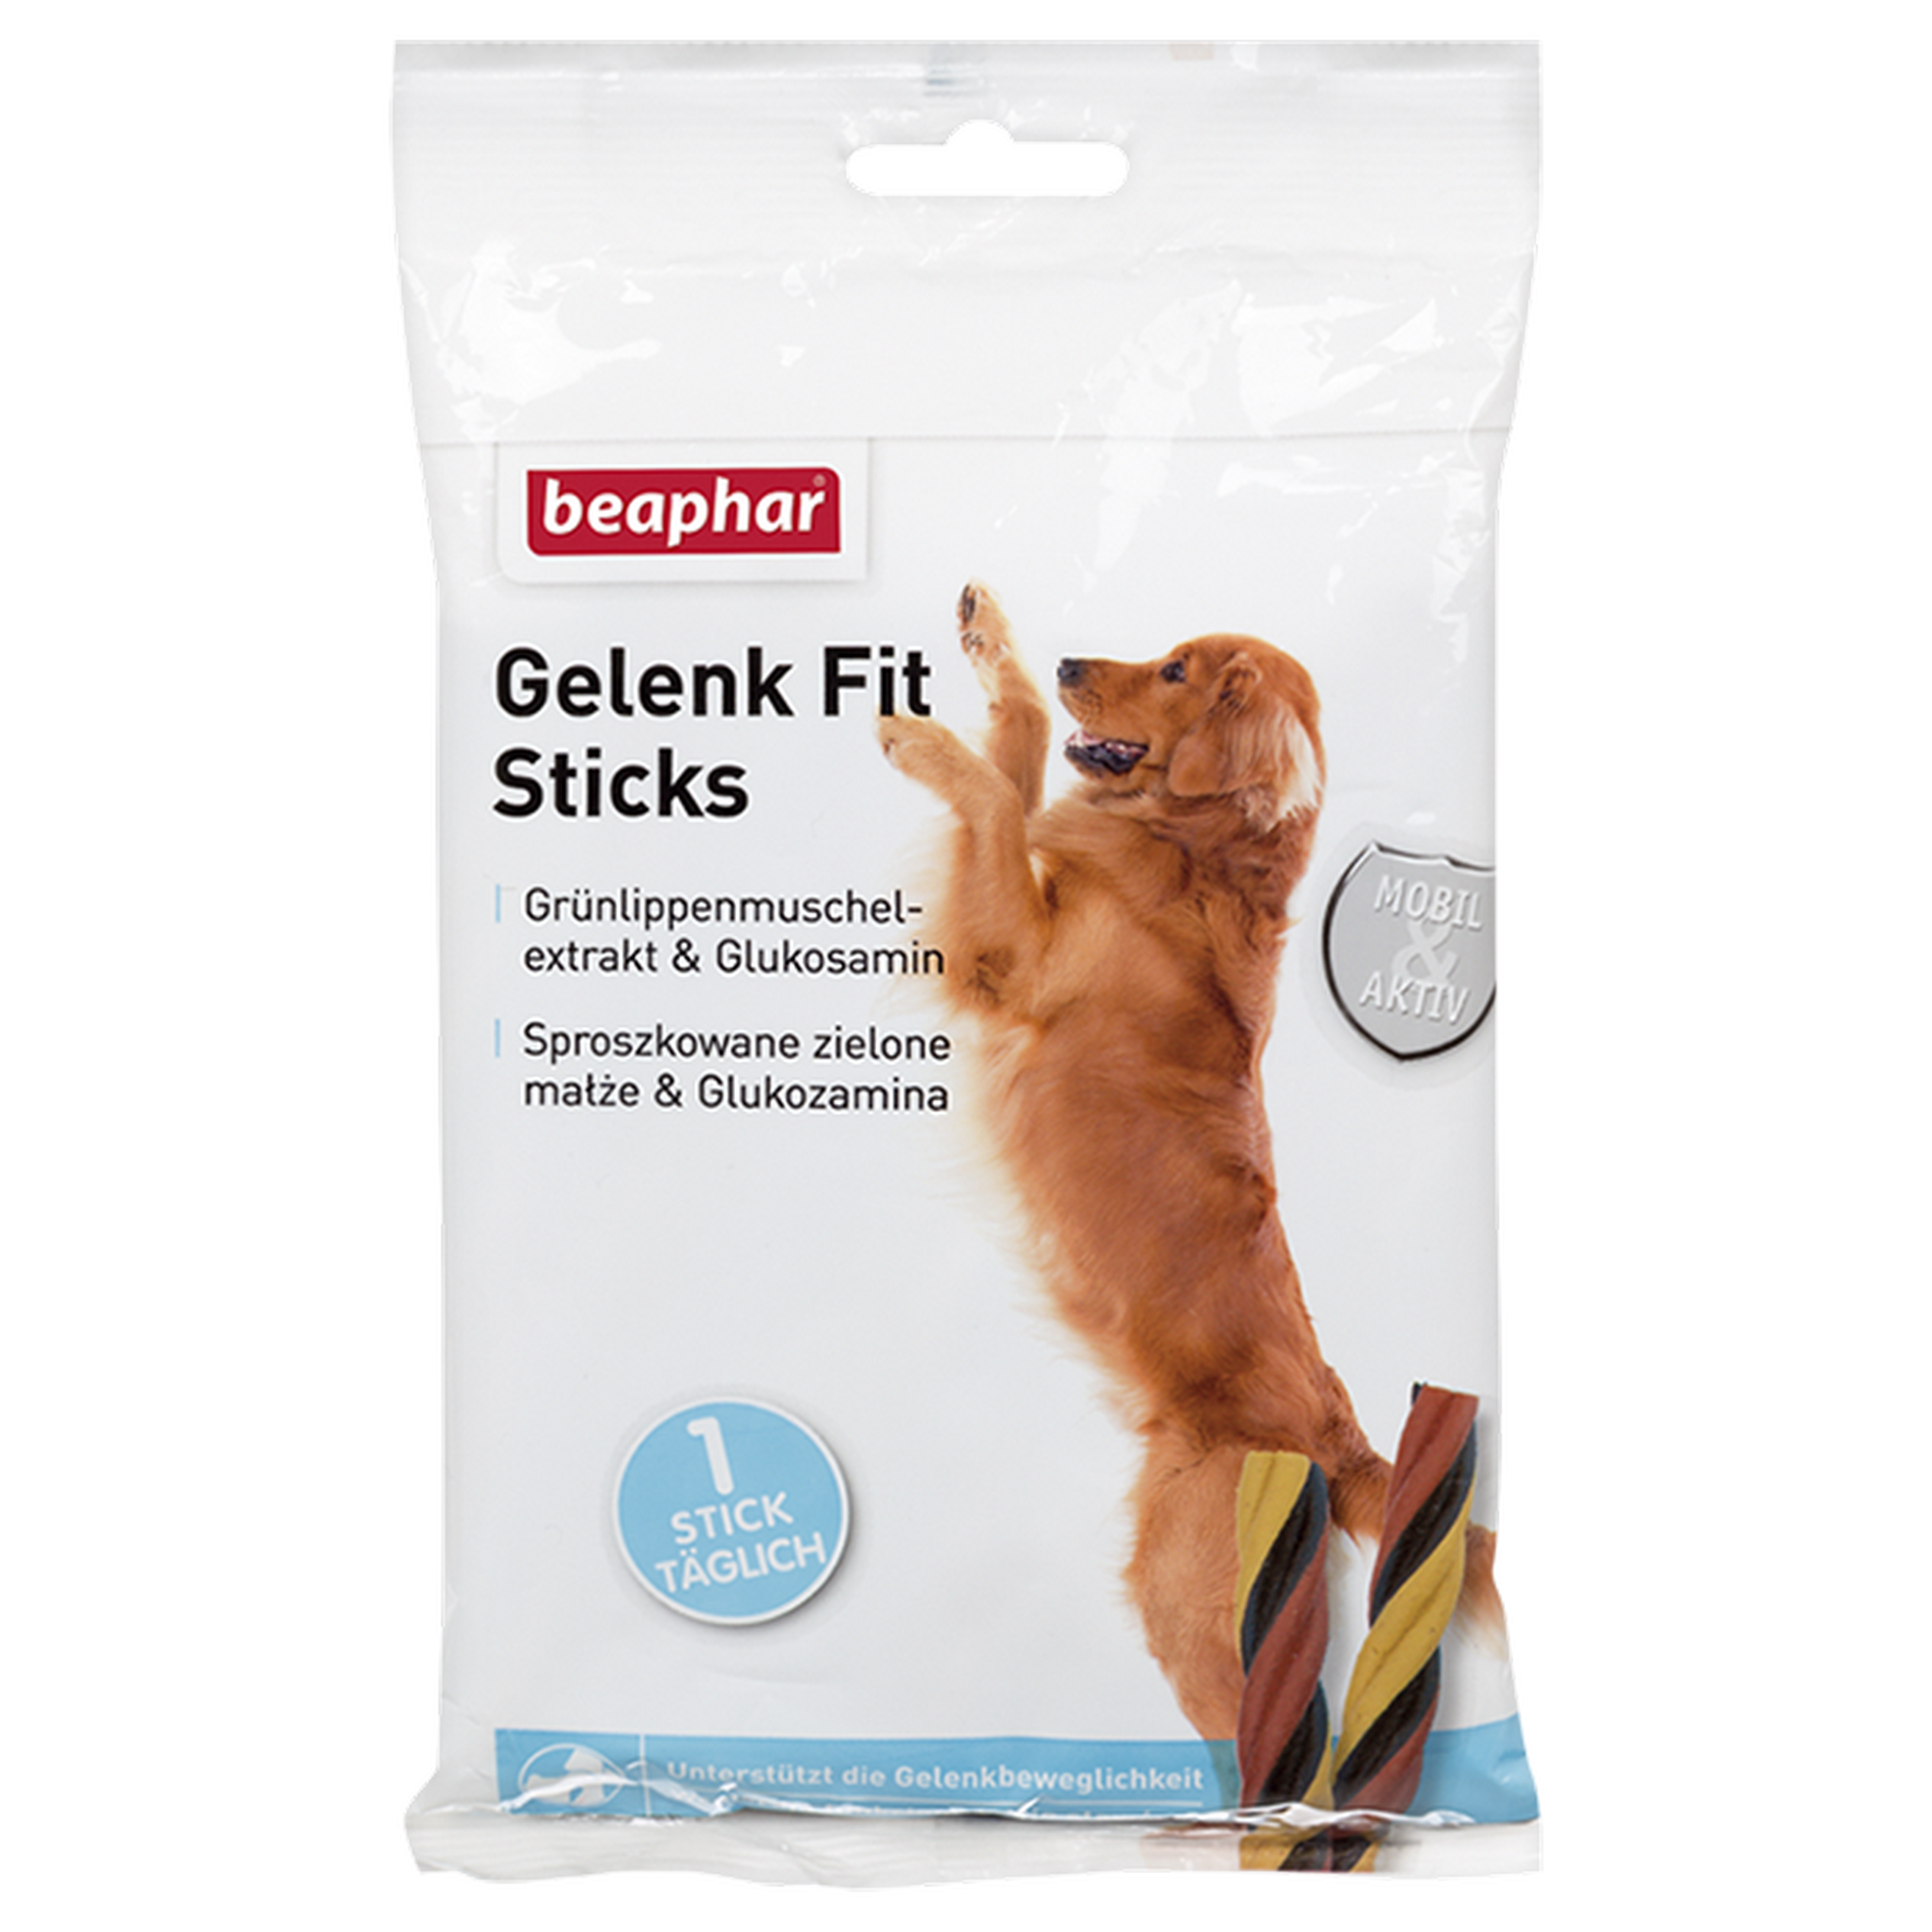 Gelenk Fit Sticks 7 Stk. + product picture